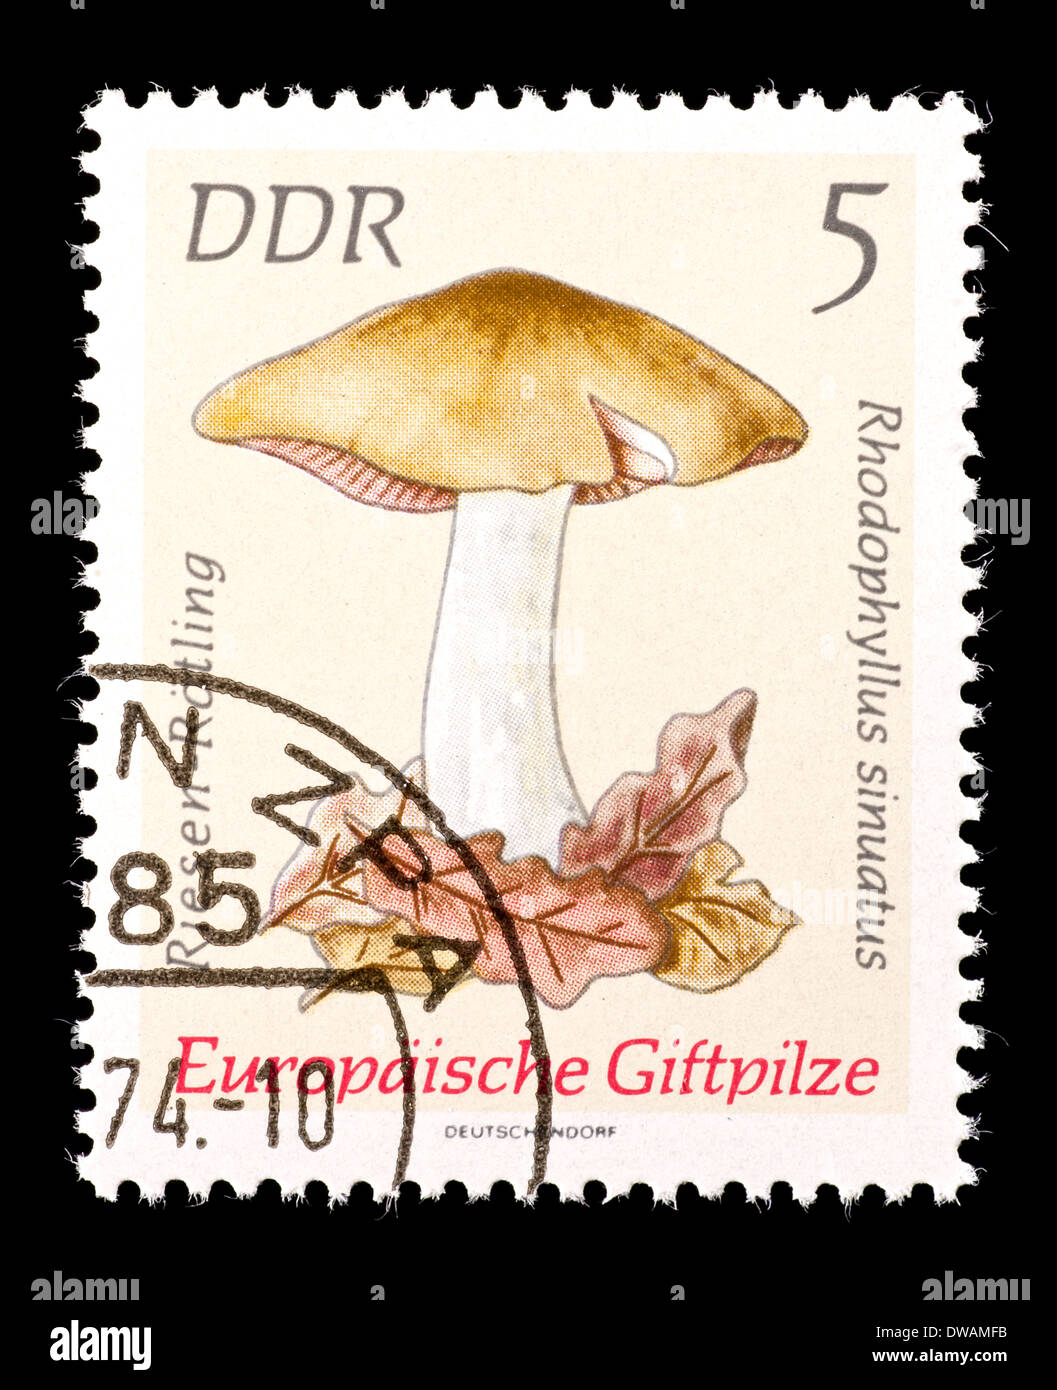 Postage stamp from East Germany (DDR) depicting a poisonous livid entoloma or  livid agaric mushroom (Rhodophyllus sinuatus) Stock Photo